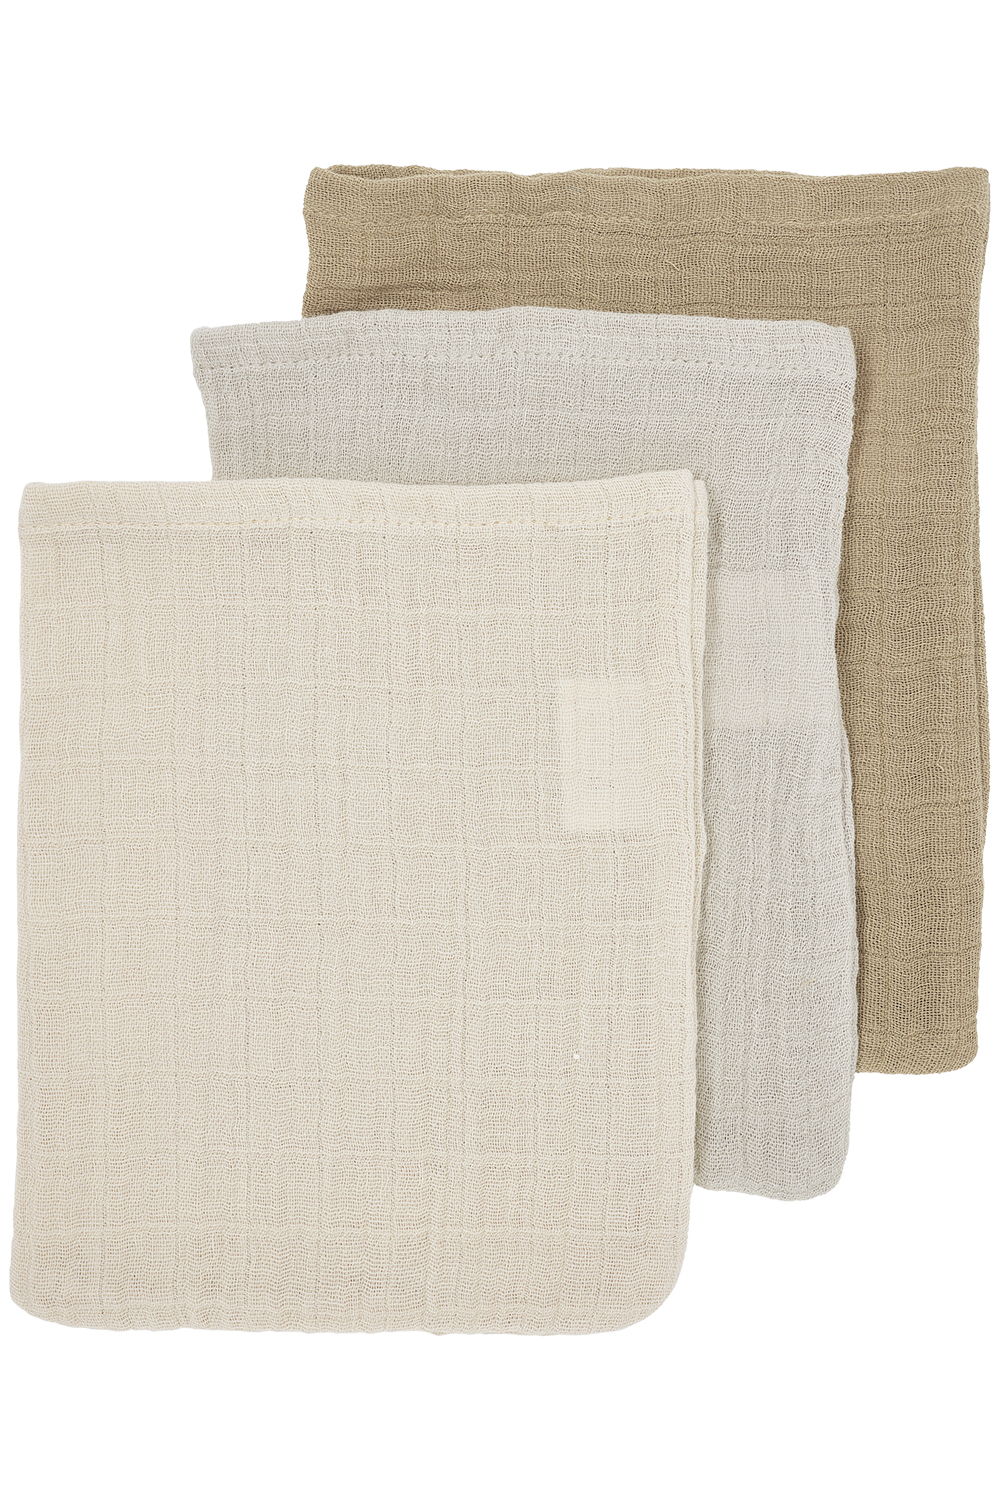 Waschhandschuhe 3er pack pre-washed musselin Uni - soft sand/greige/taupe - 20x17cm